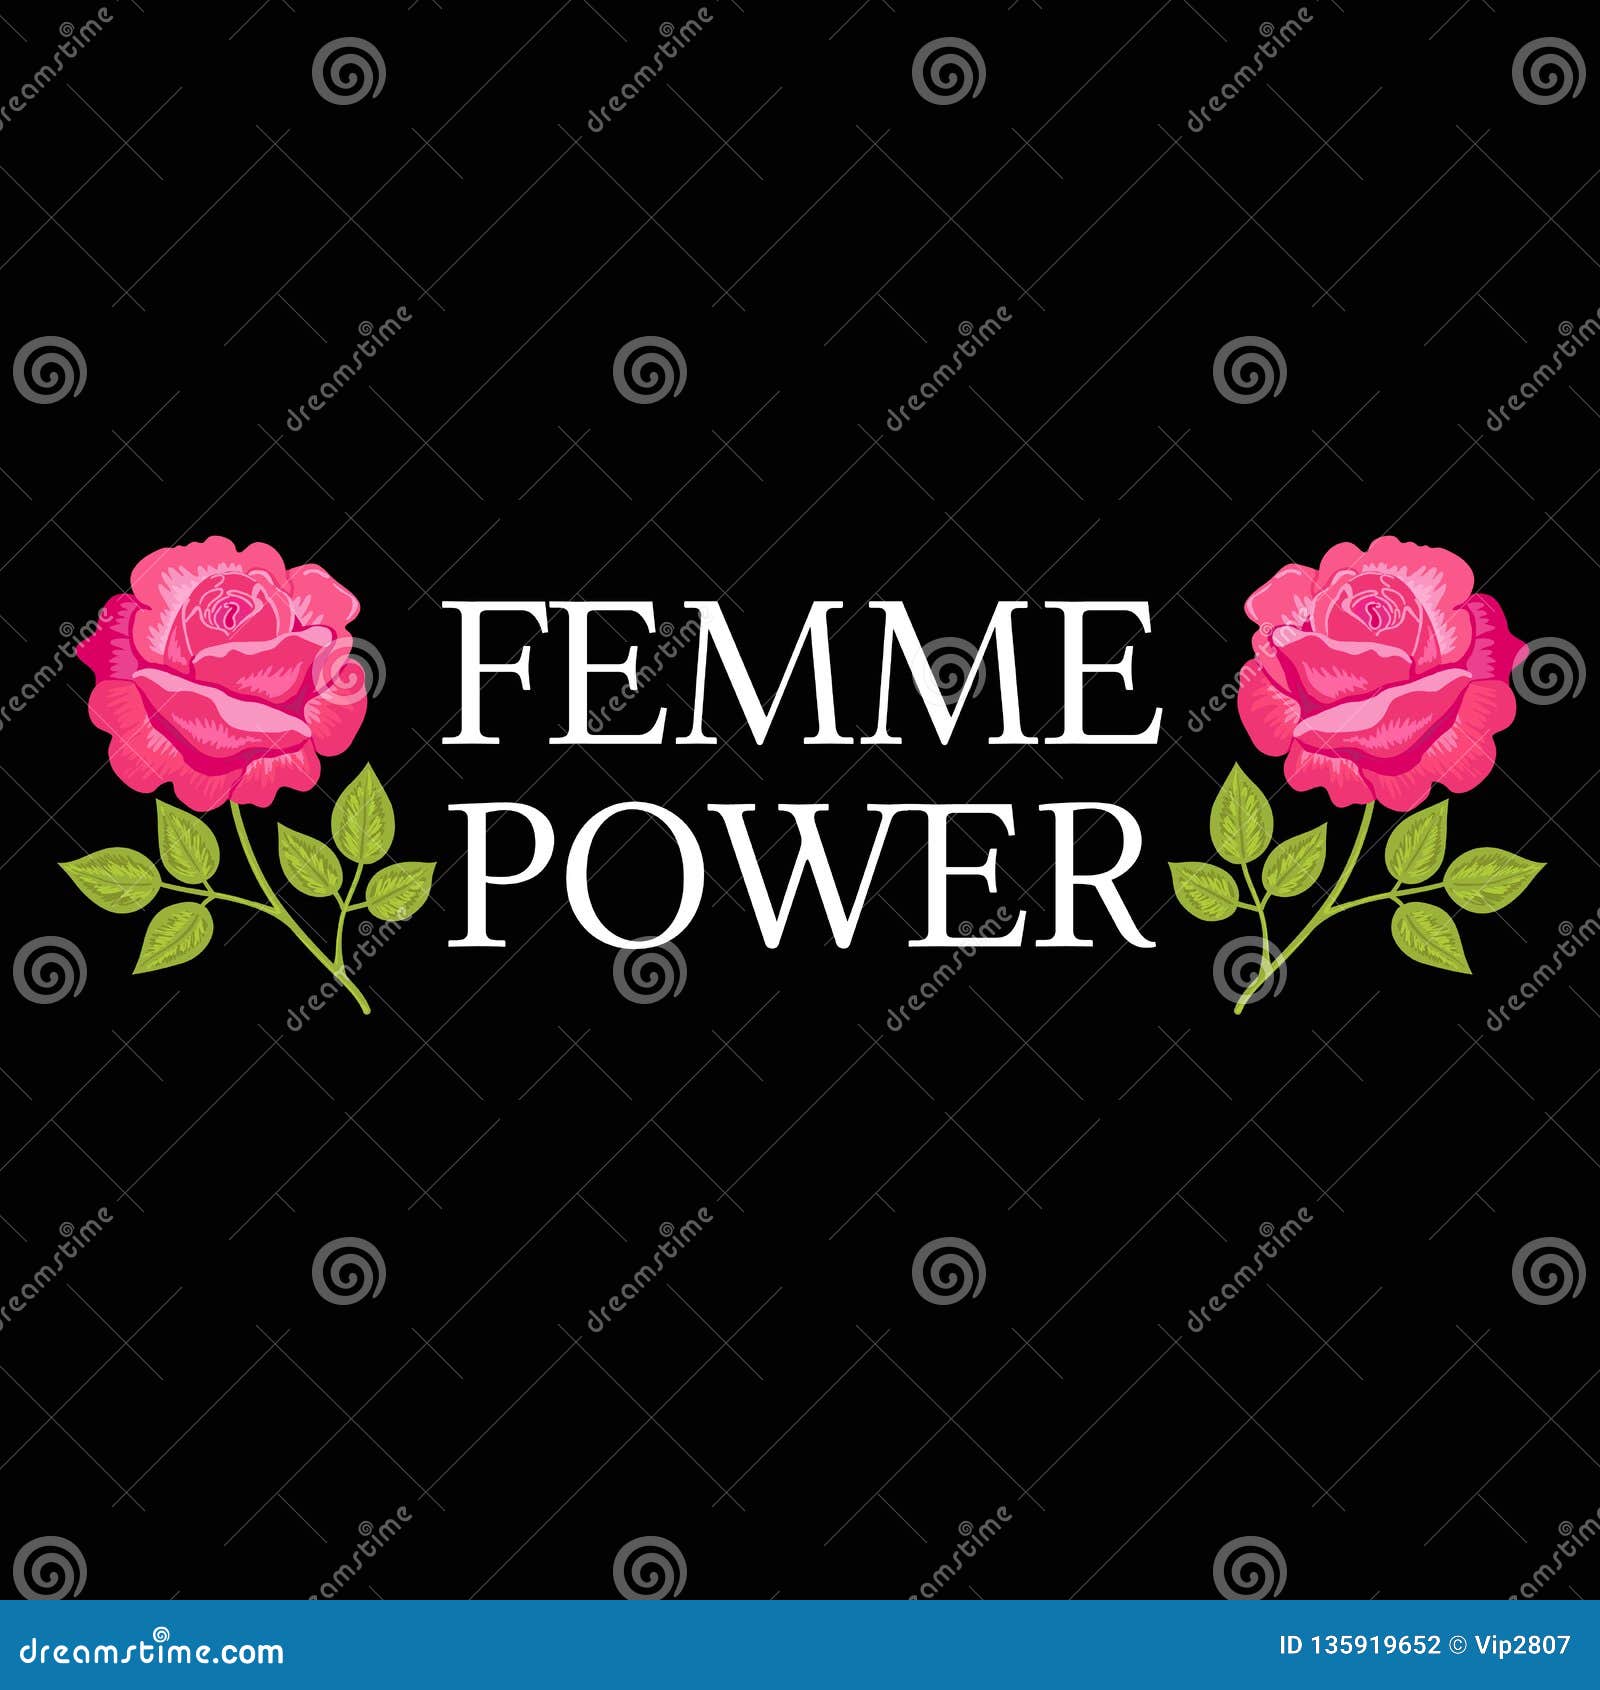 Femme Power, Slogan Graphic with Vector Illustration, for T-shirt ...